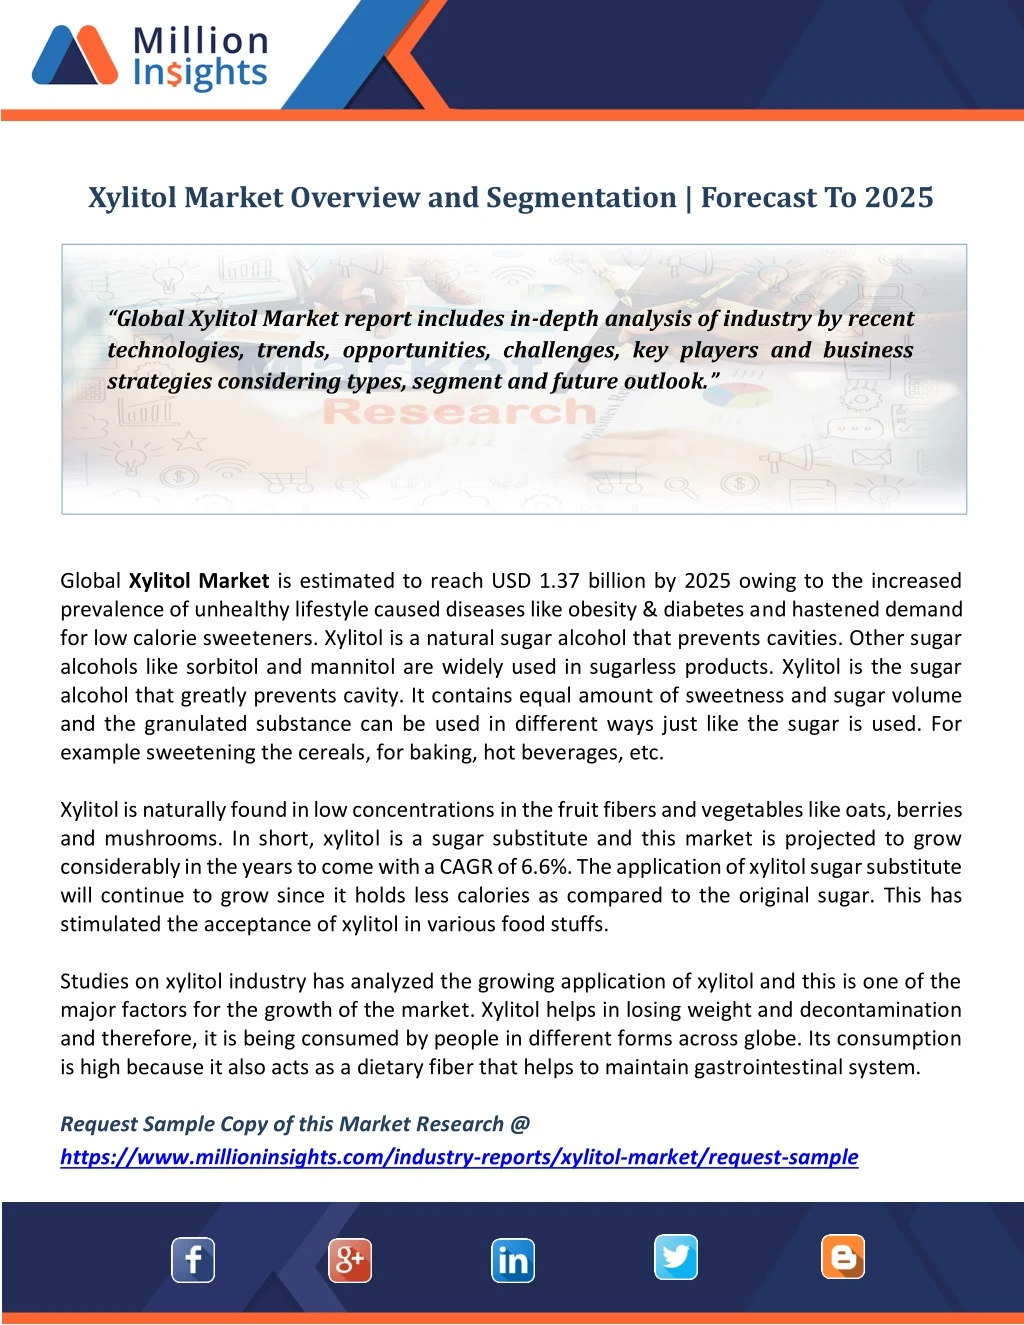 xylitol market overview and segmentation forecast